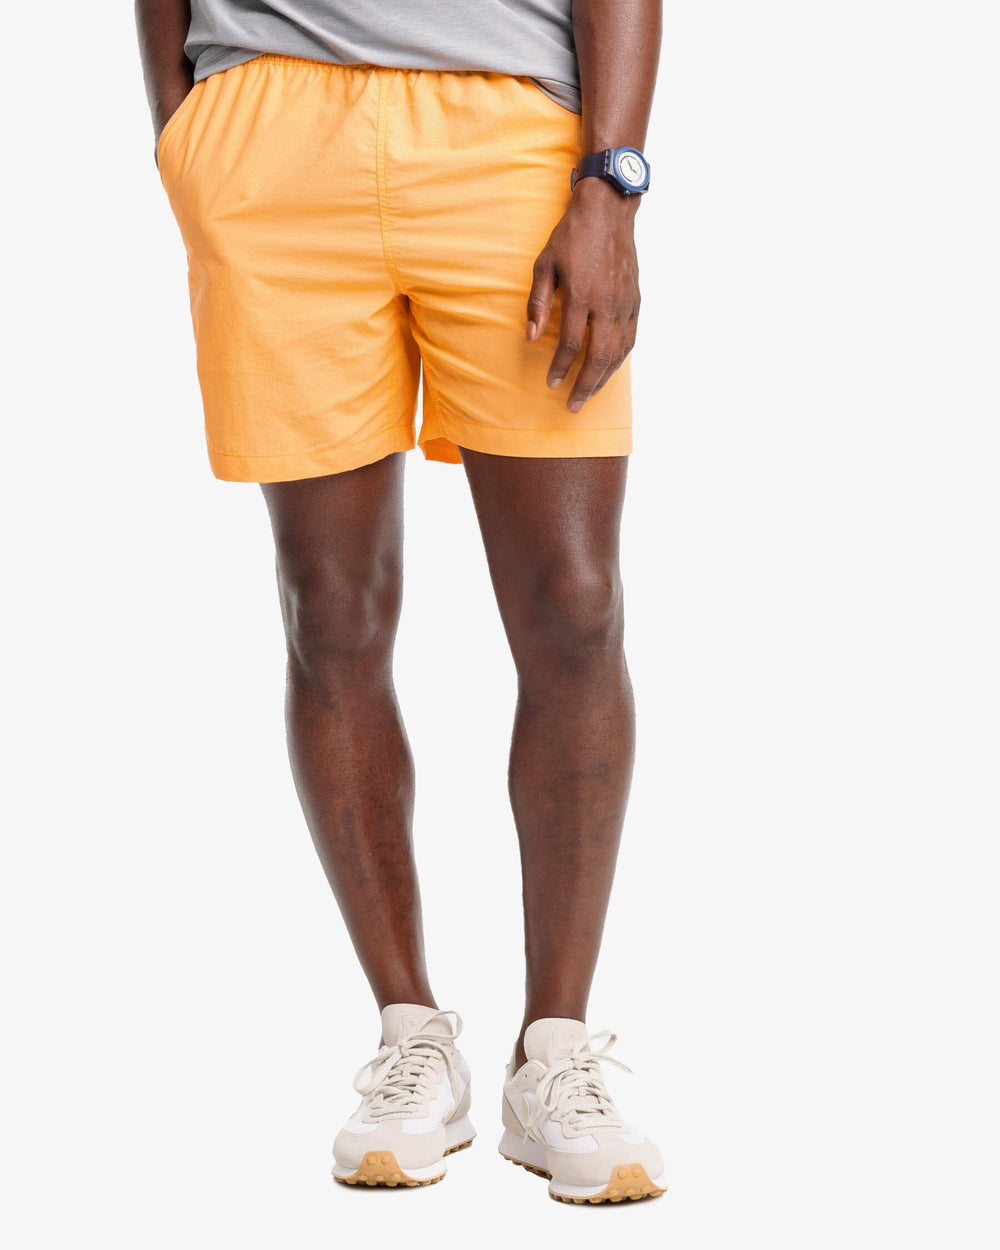 The front view of the Southern Tide Shoreline 6 Inch Short by Southern Tide - Horizon